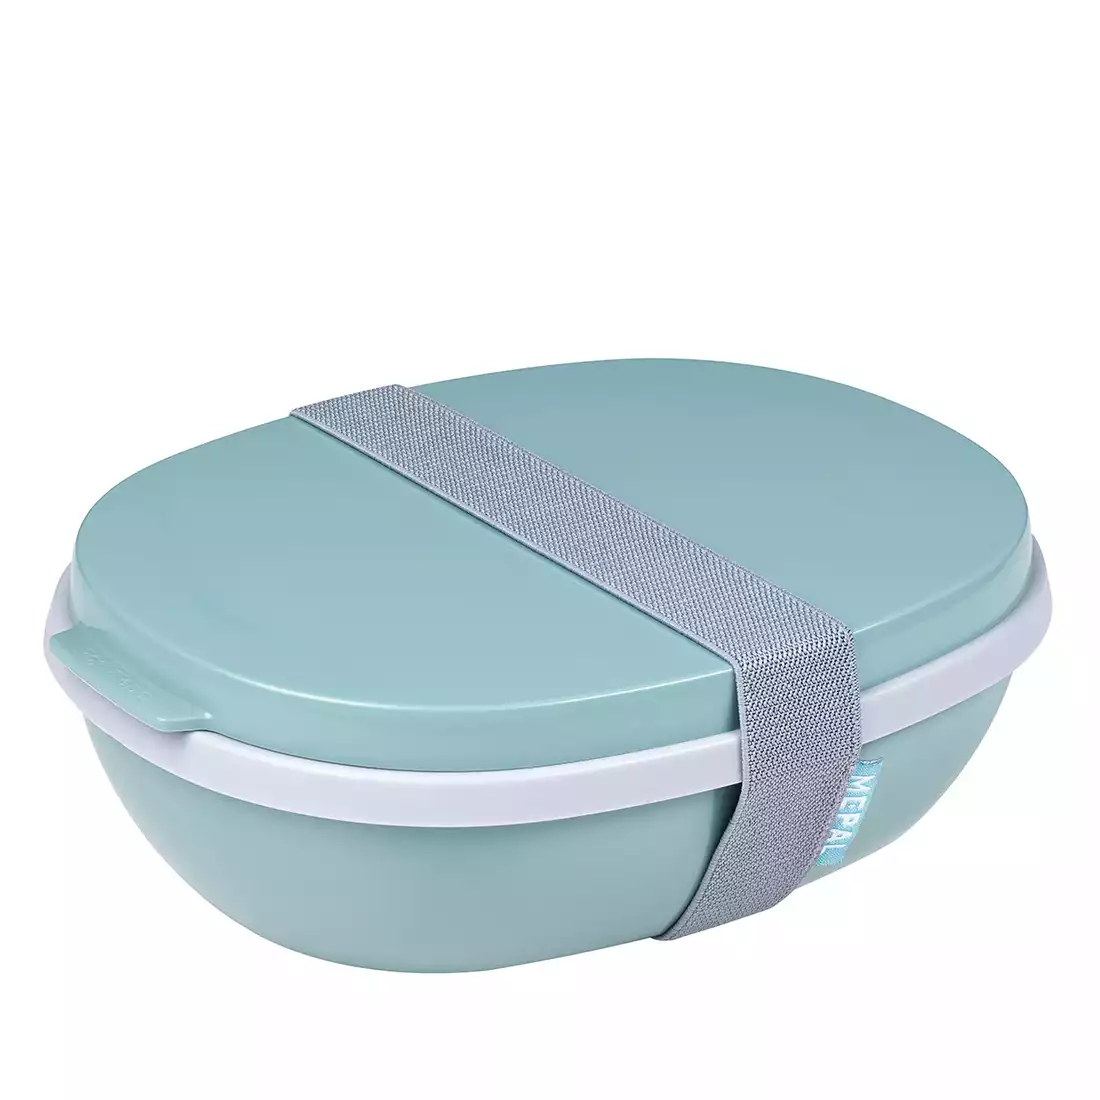 Mepal Ellipse Duo Nordic Green lunchbox, tyrkysová